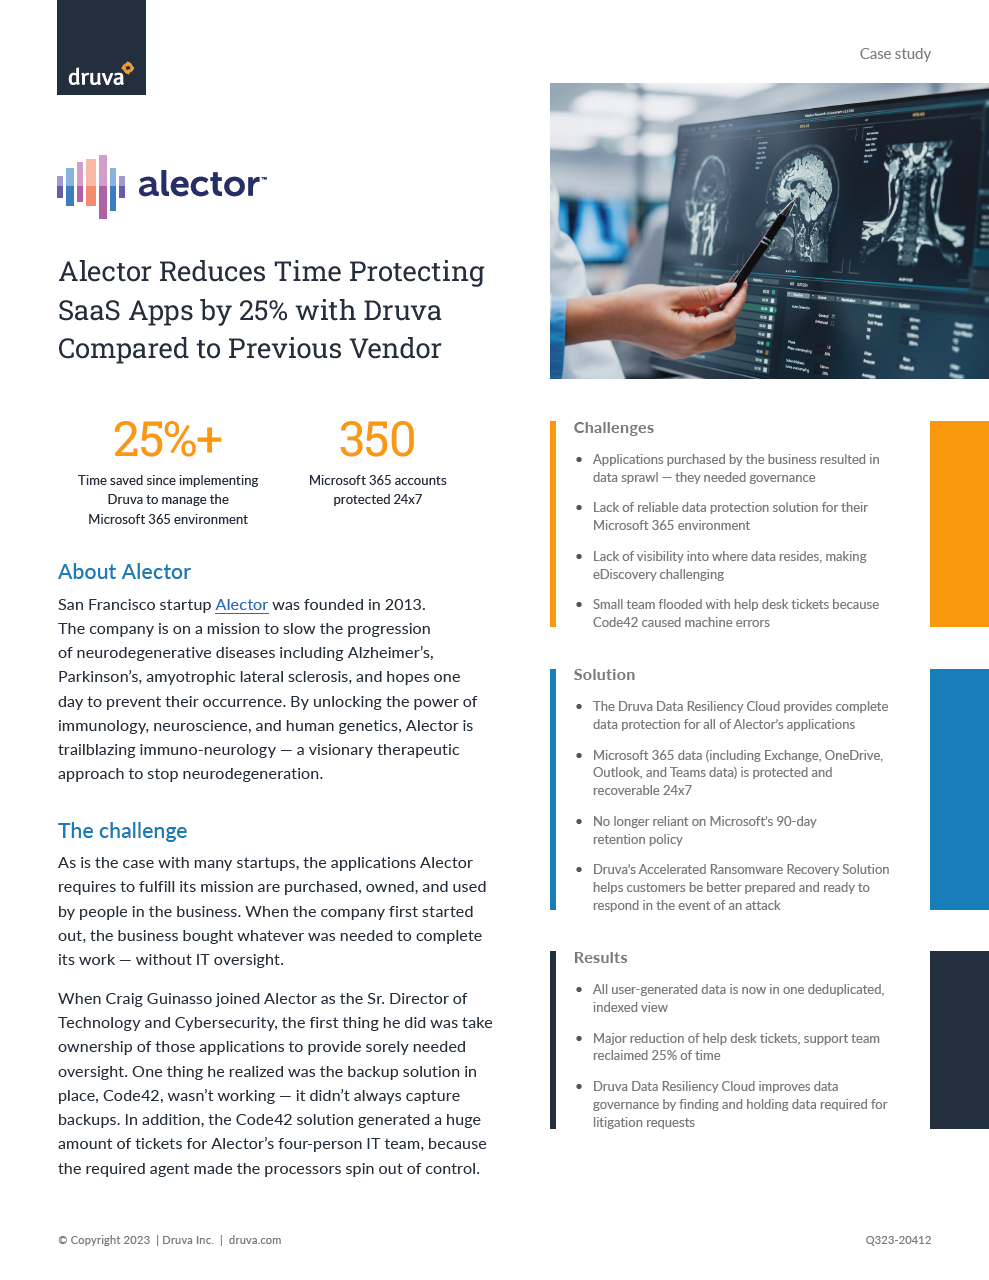 Alector reduces time protecting SaaS apps by 25% with Druva compared to previous vendor